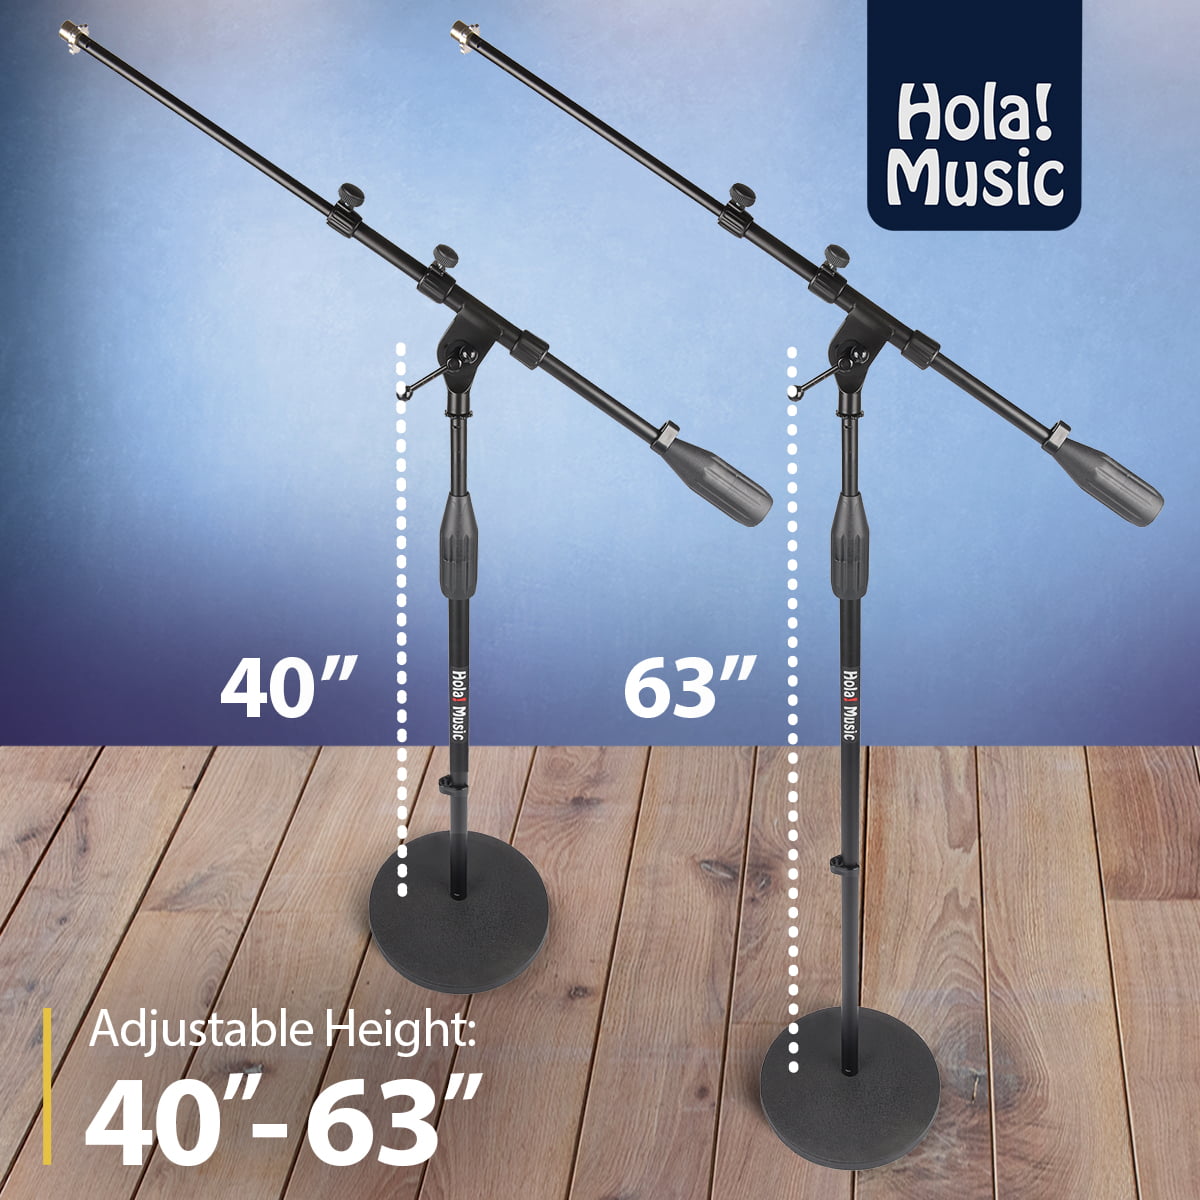 Hola Music HPS-101KD Professional Low Profile Tripod Microphone Mic Stand for Kick Drums Black 